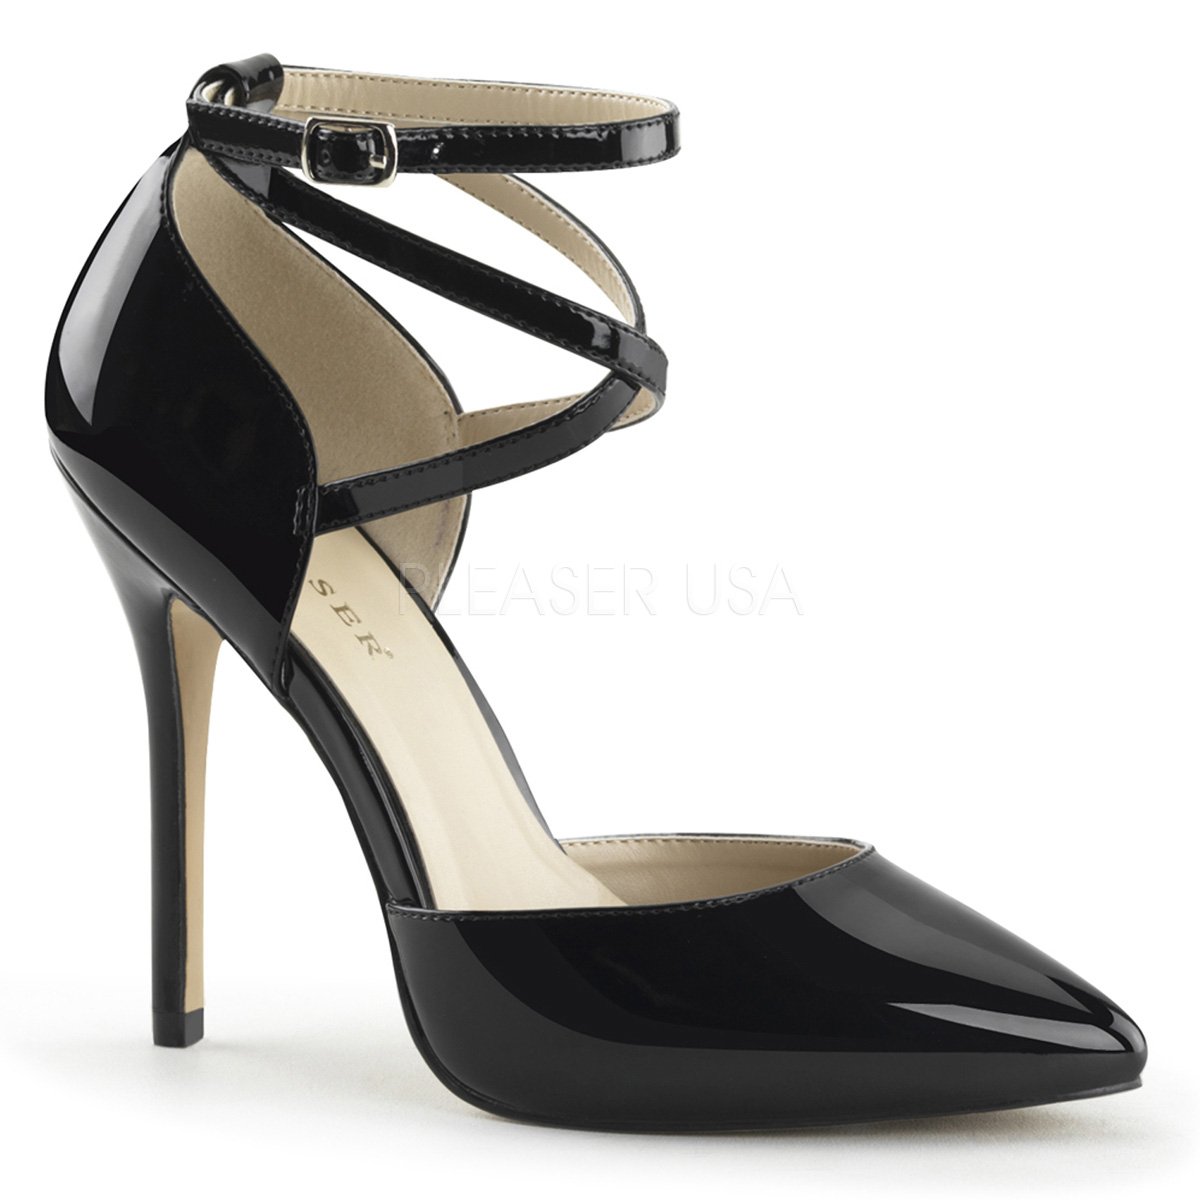 Ankle Strap Patent Pump Shoe with 5-inch Stiletto Heel 3-colors